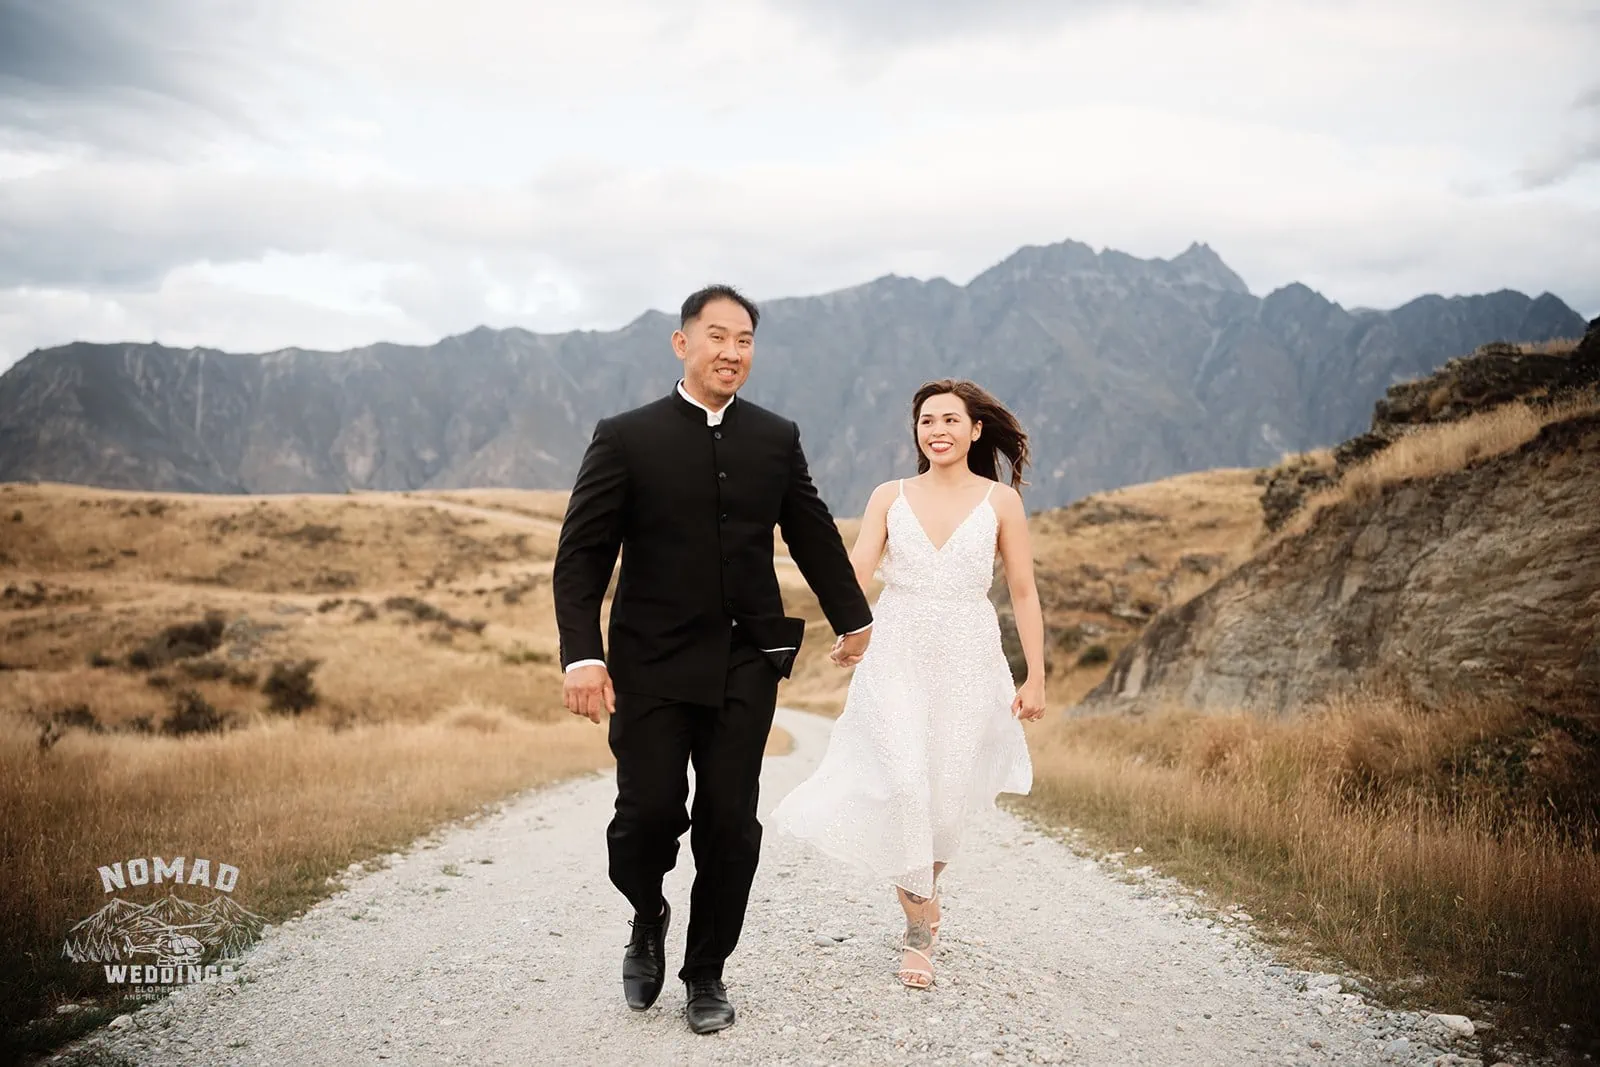 Nhi & Nicholas' pre-wedding shoot with mountains in the background.